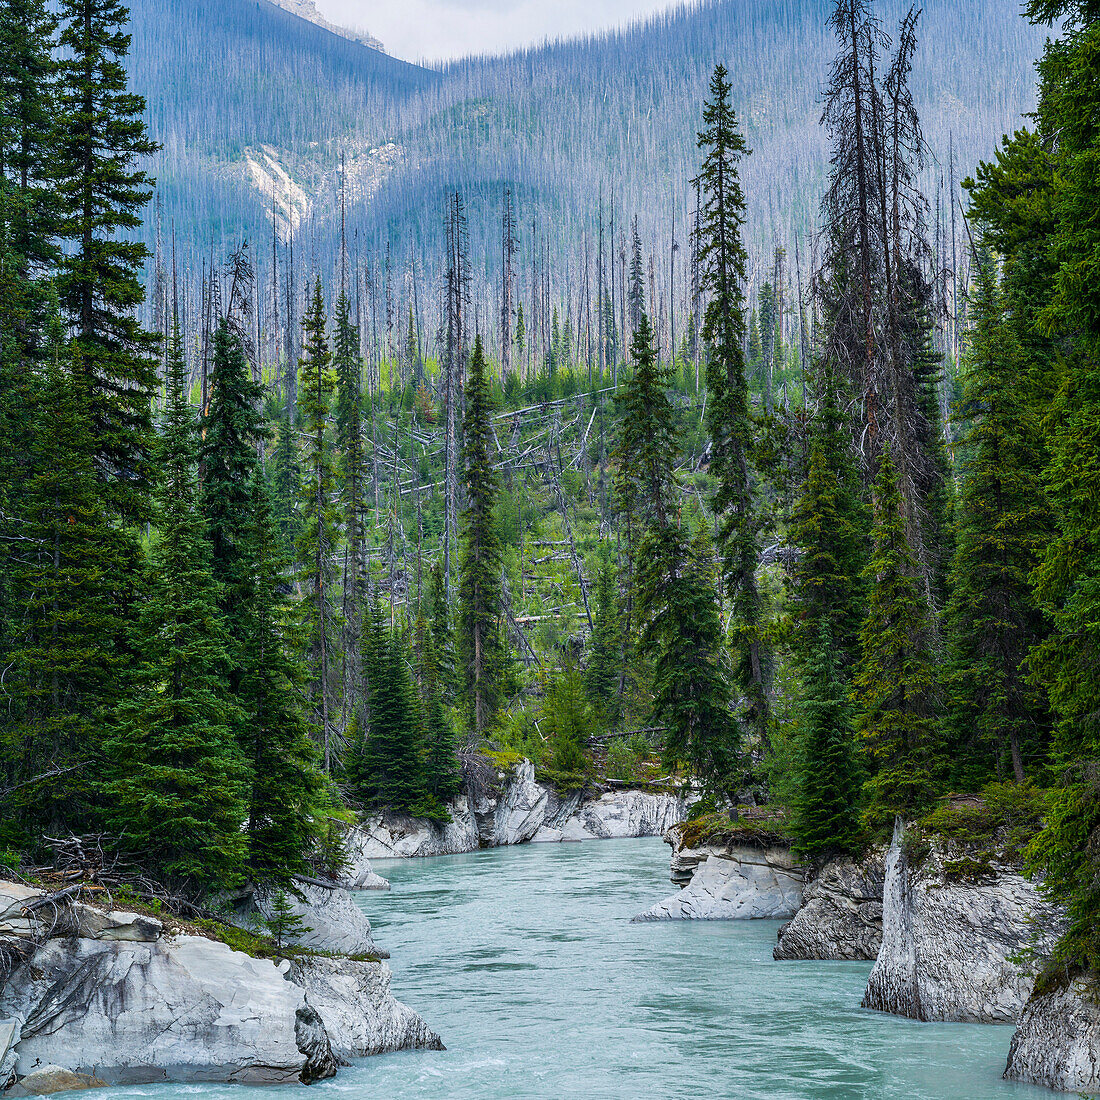 A jade coloured river flowing through a mountainous landscape and a coniferous forest; Radium Hot Springs, British Columbia, Canada